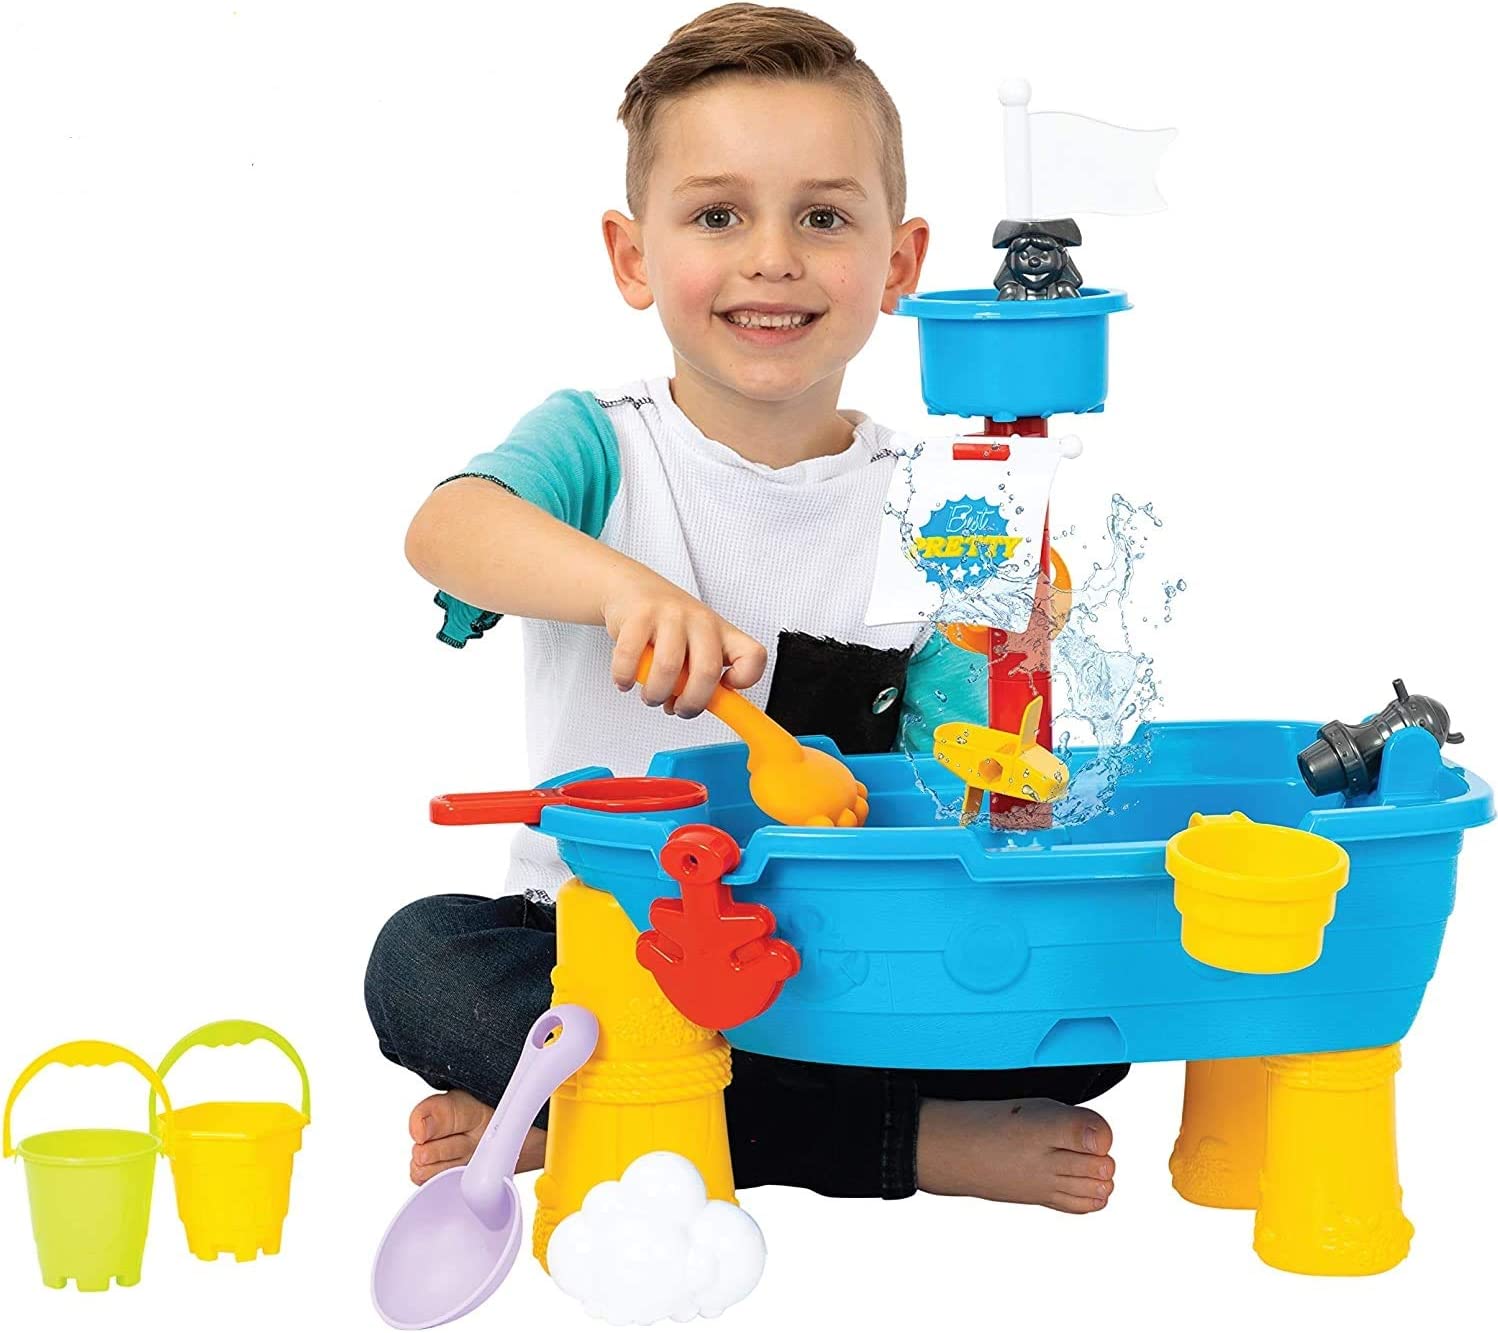 ToyVelt Motor Skills Boat Sand & Water Table For Toddlers